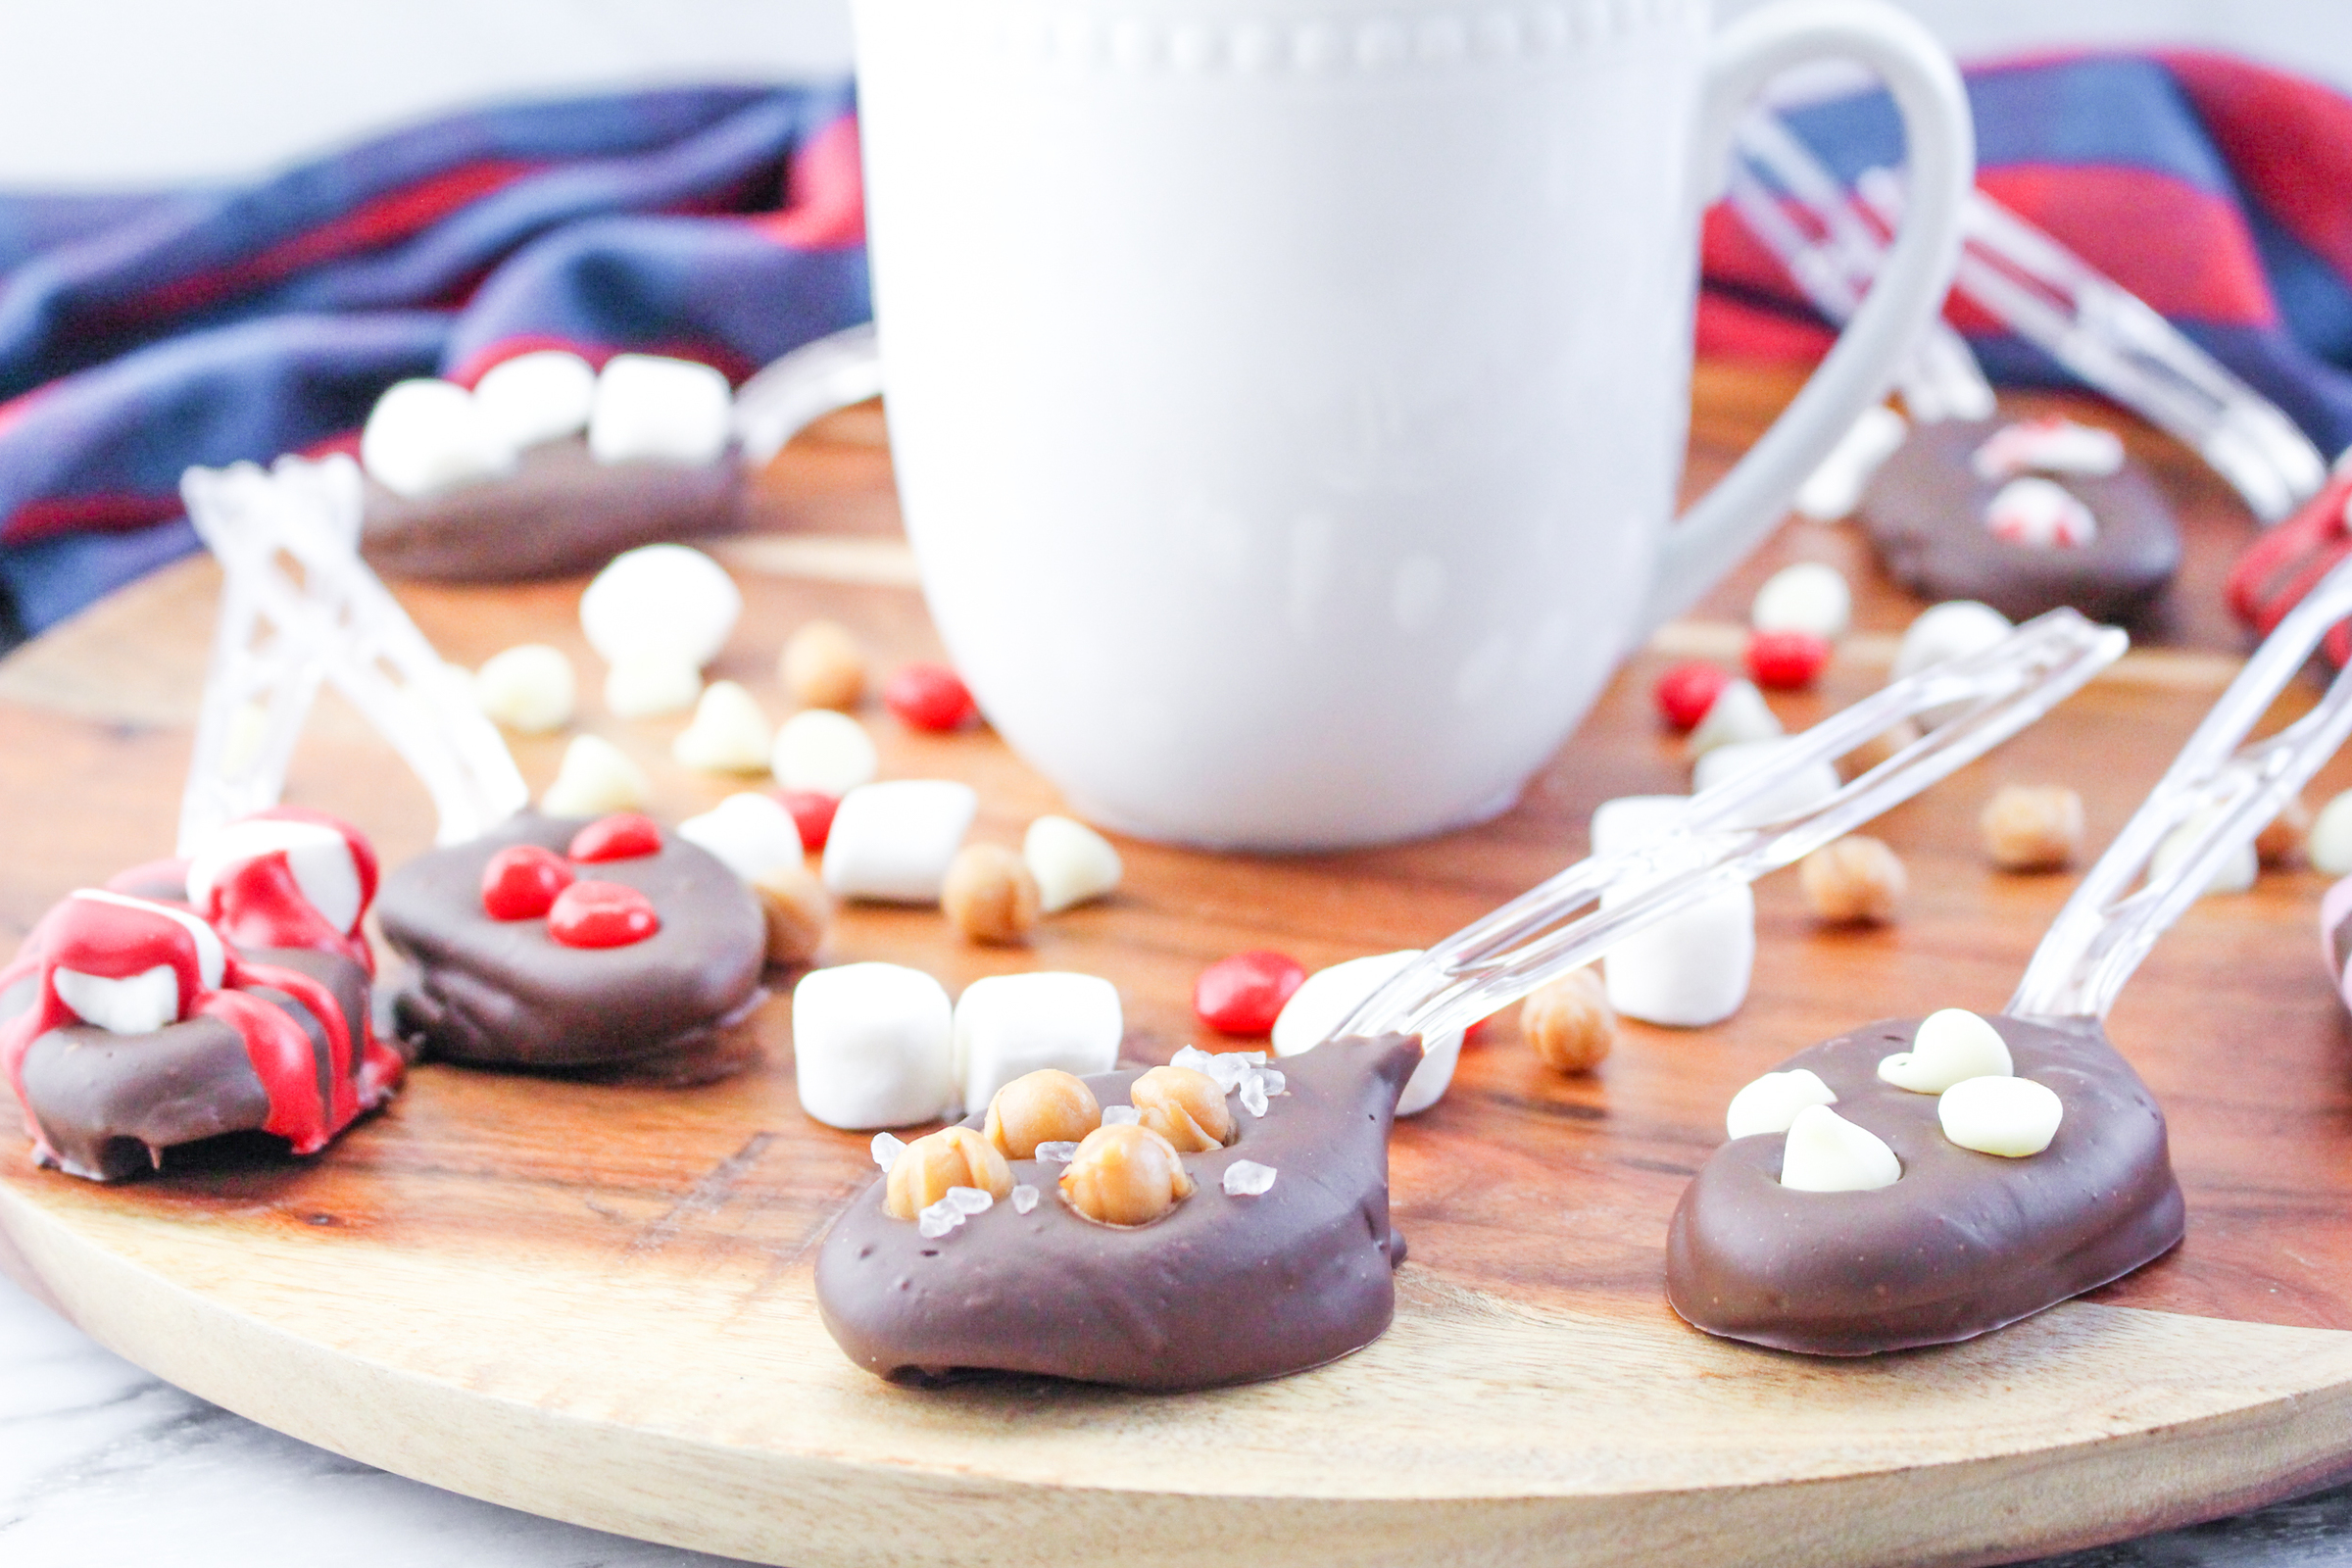 A white mug with hot chocolate and various diy hot chocolate spoons on a wooden background.